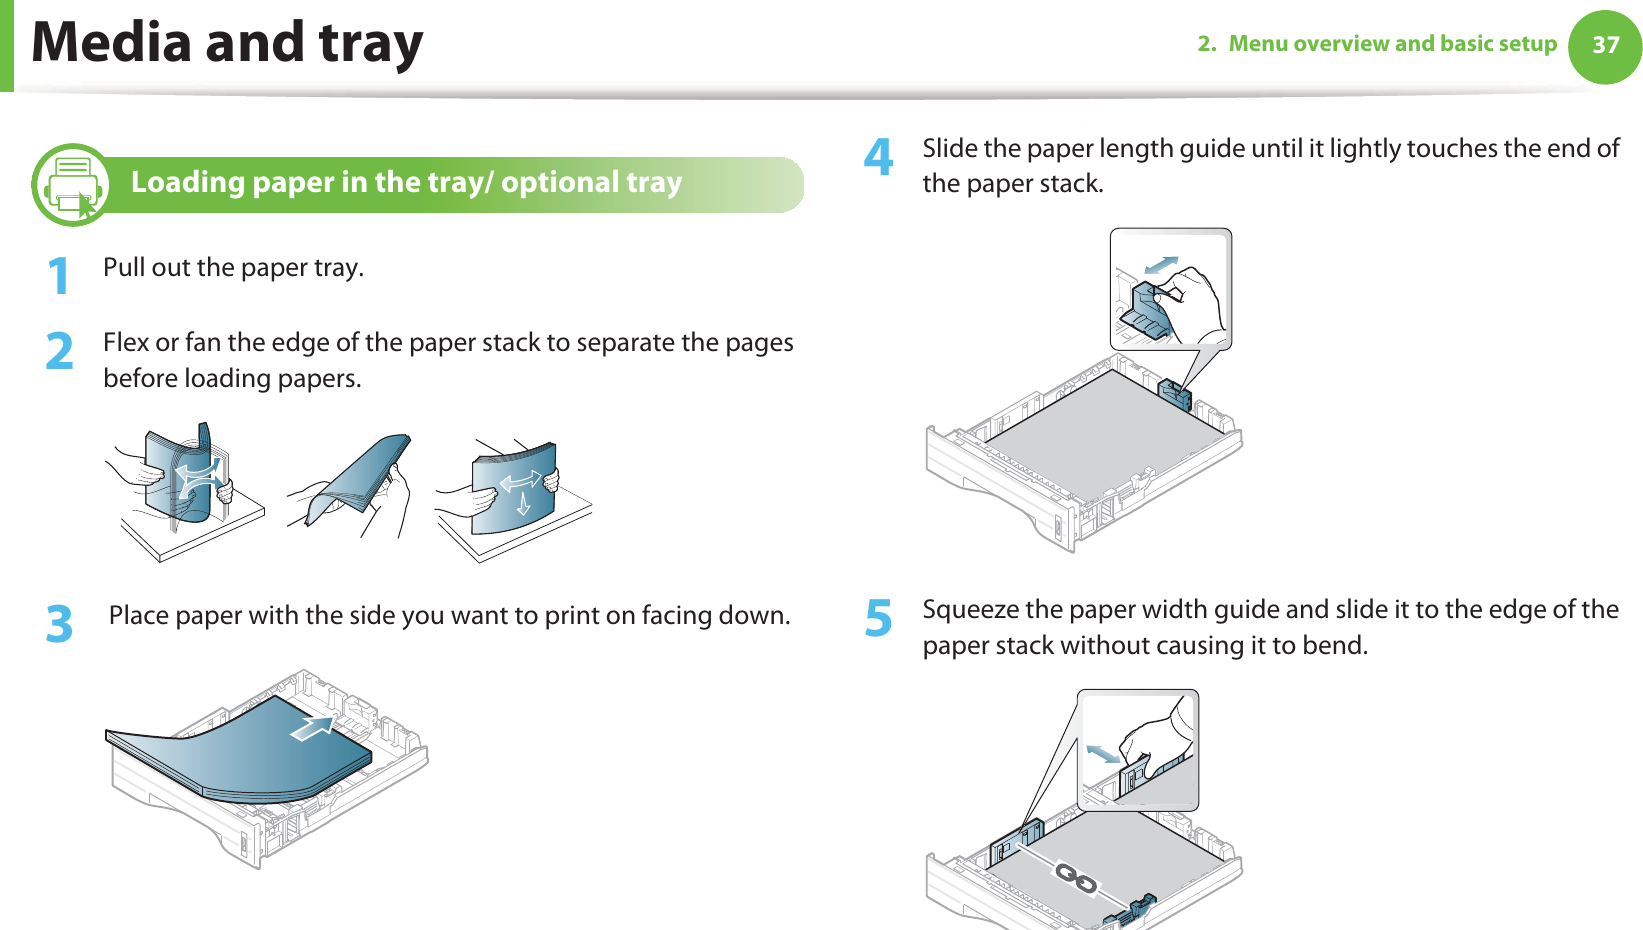 Media and tray 372. Menu overview and basic setup3 Loading paper in the tray/ optional tray1Pull out the paper tray.2  Flex or fan the edge of the paper stack to separate the pages before loading papers.3   Place paper with the side you want to print on facing down.4  Slide the paper length guide until it lightly touches the end of the paper stack.5  Squeeze the paper width guide and slide it to the edge of the paper stack without causing it to bend.